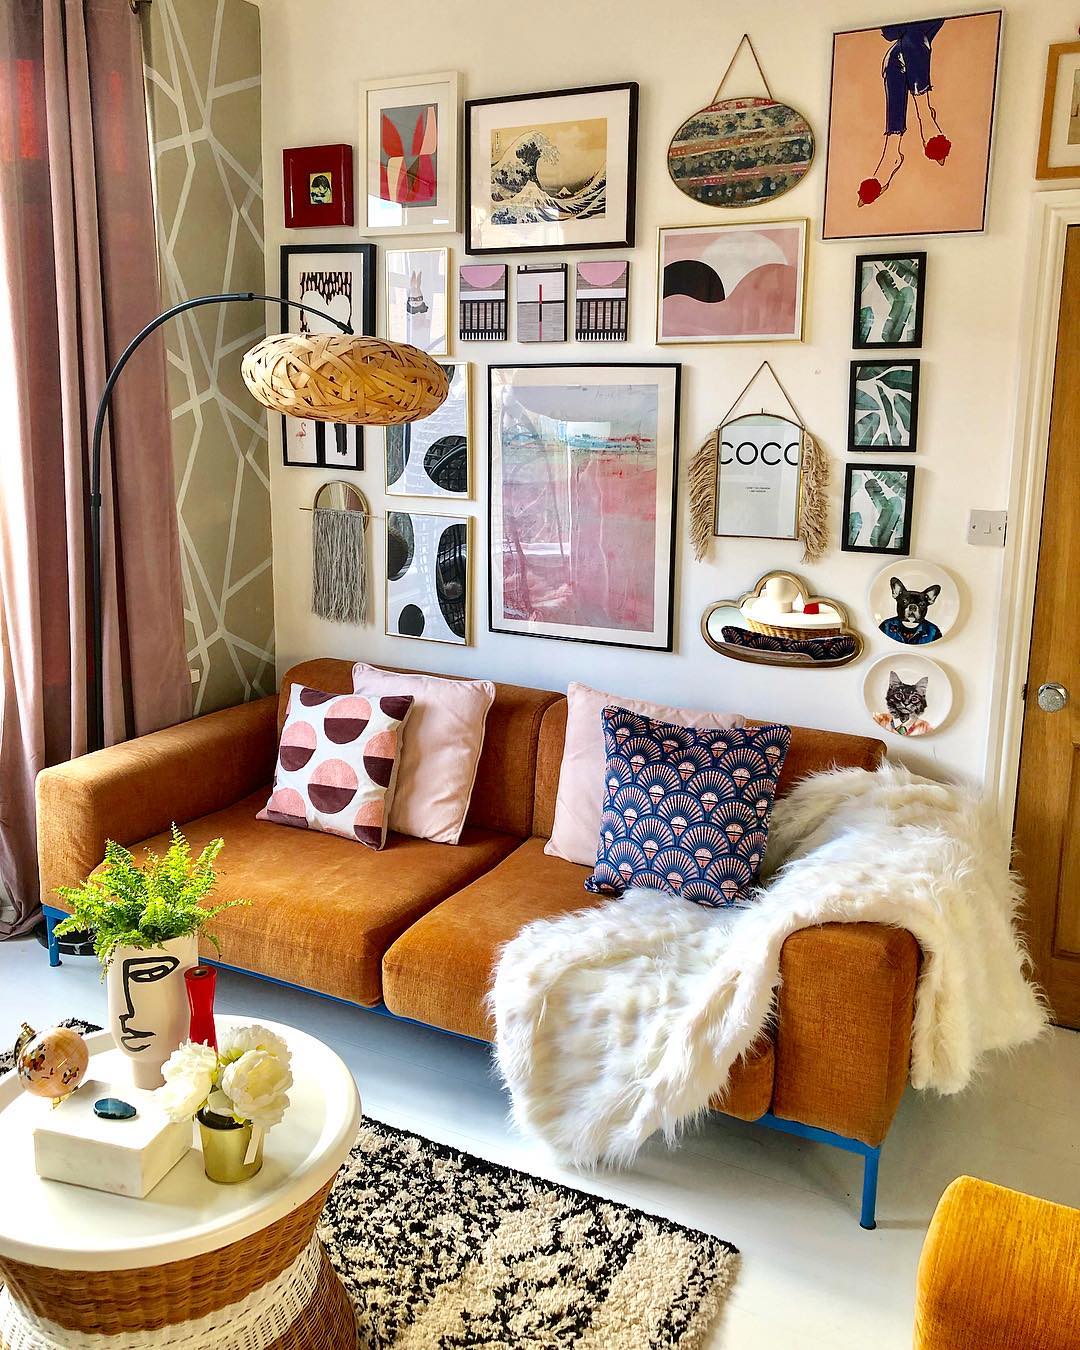 5 Amazing Home Decor Accounts to Follow on Instagram